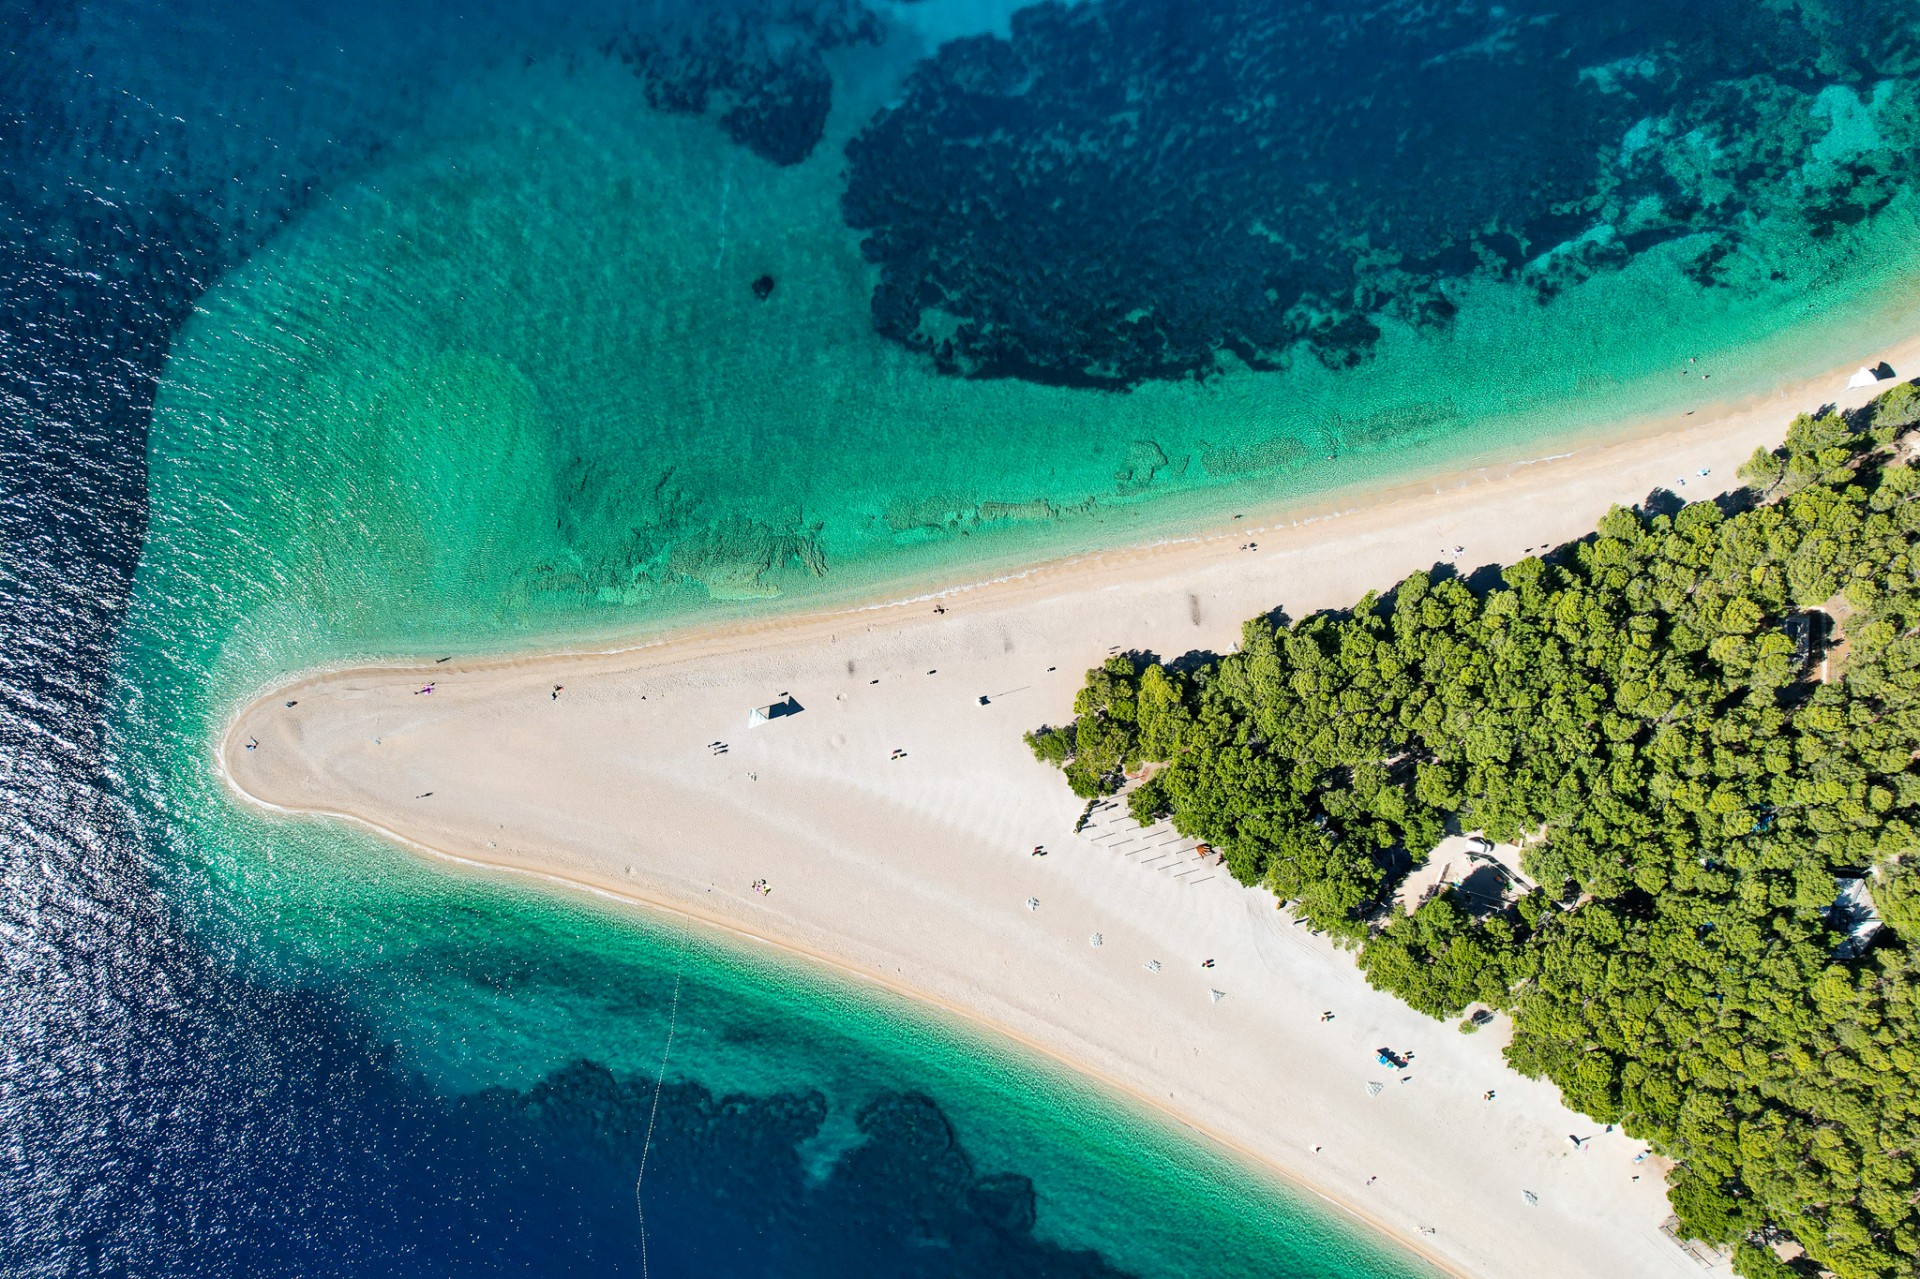 Destination Croatia - everything you need to know